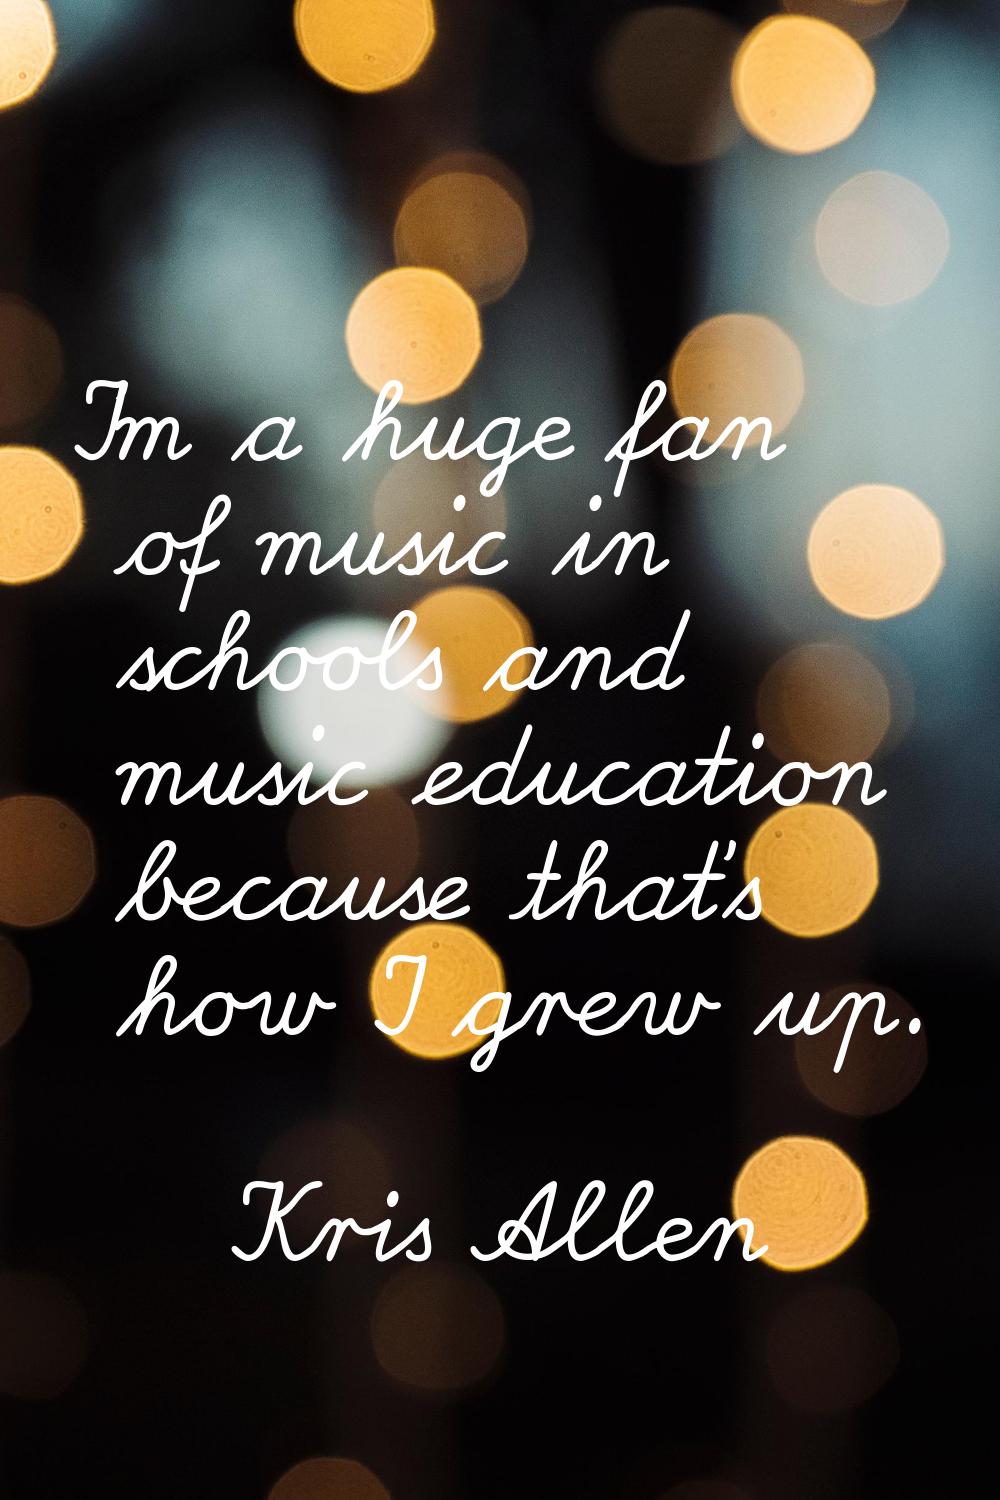 I'm a huge fan of music in schools and music education because that's how I grew up.